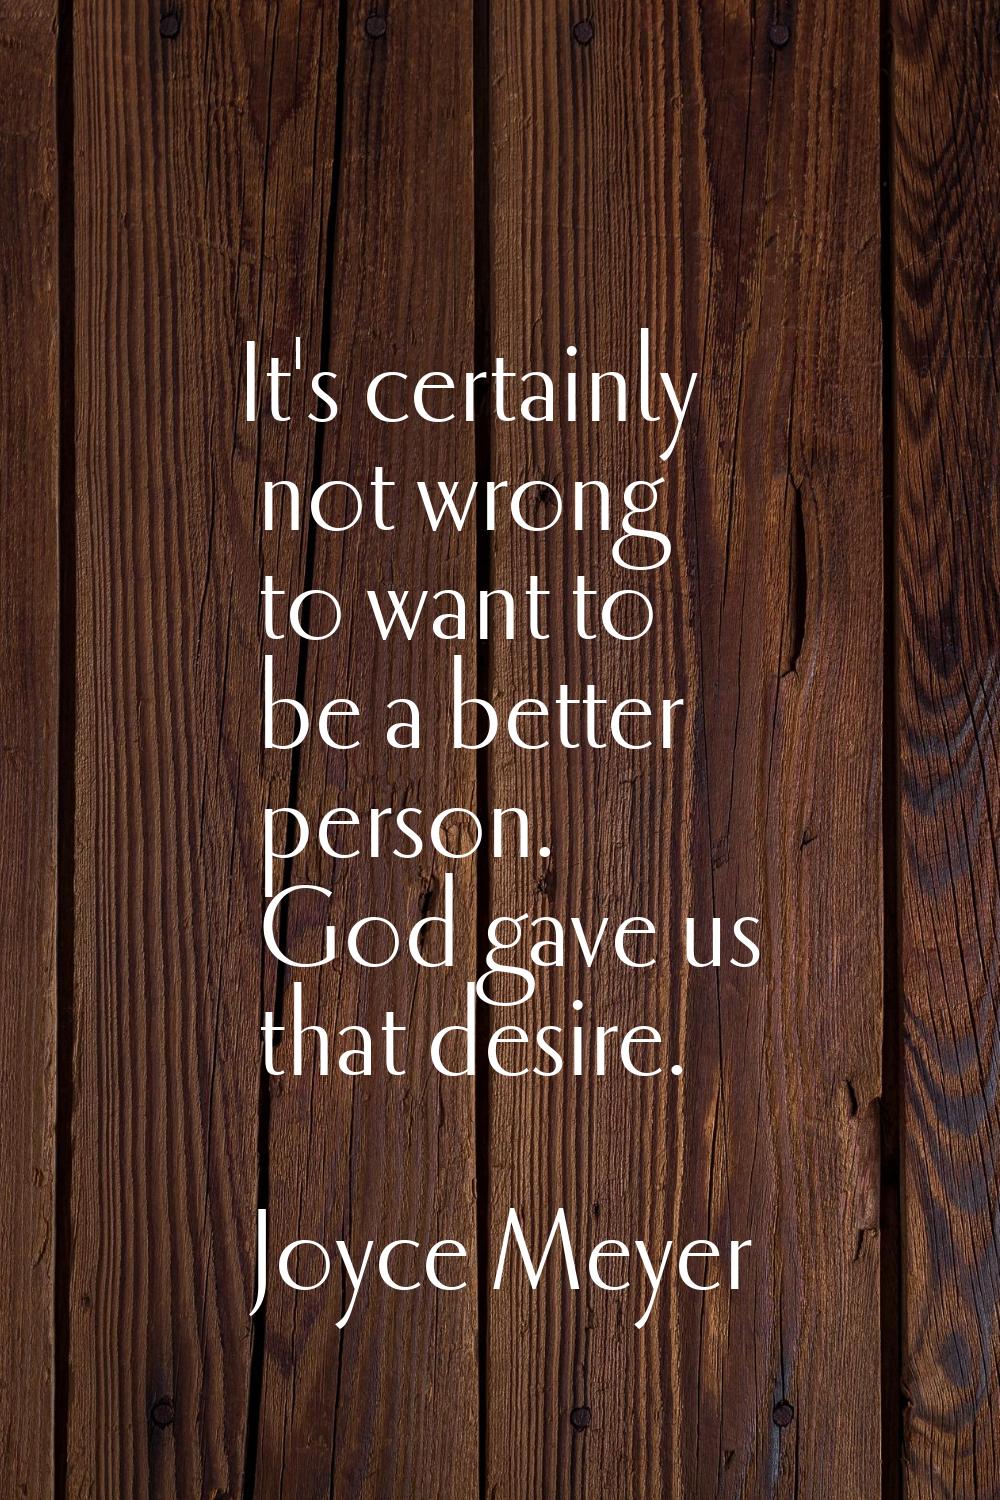 It's certainly not wrong to want to be a better person. God gave us that desire.